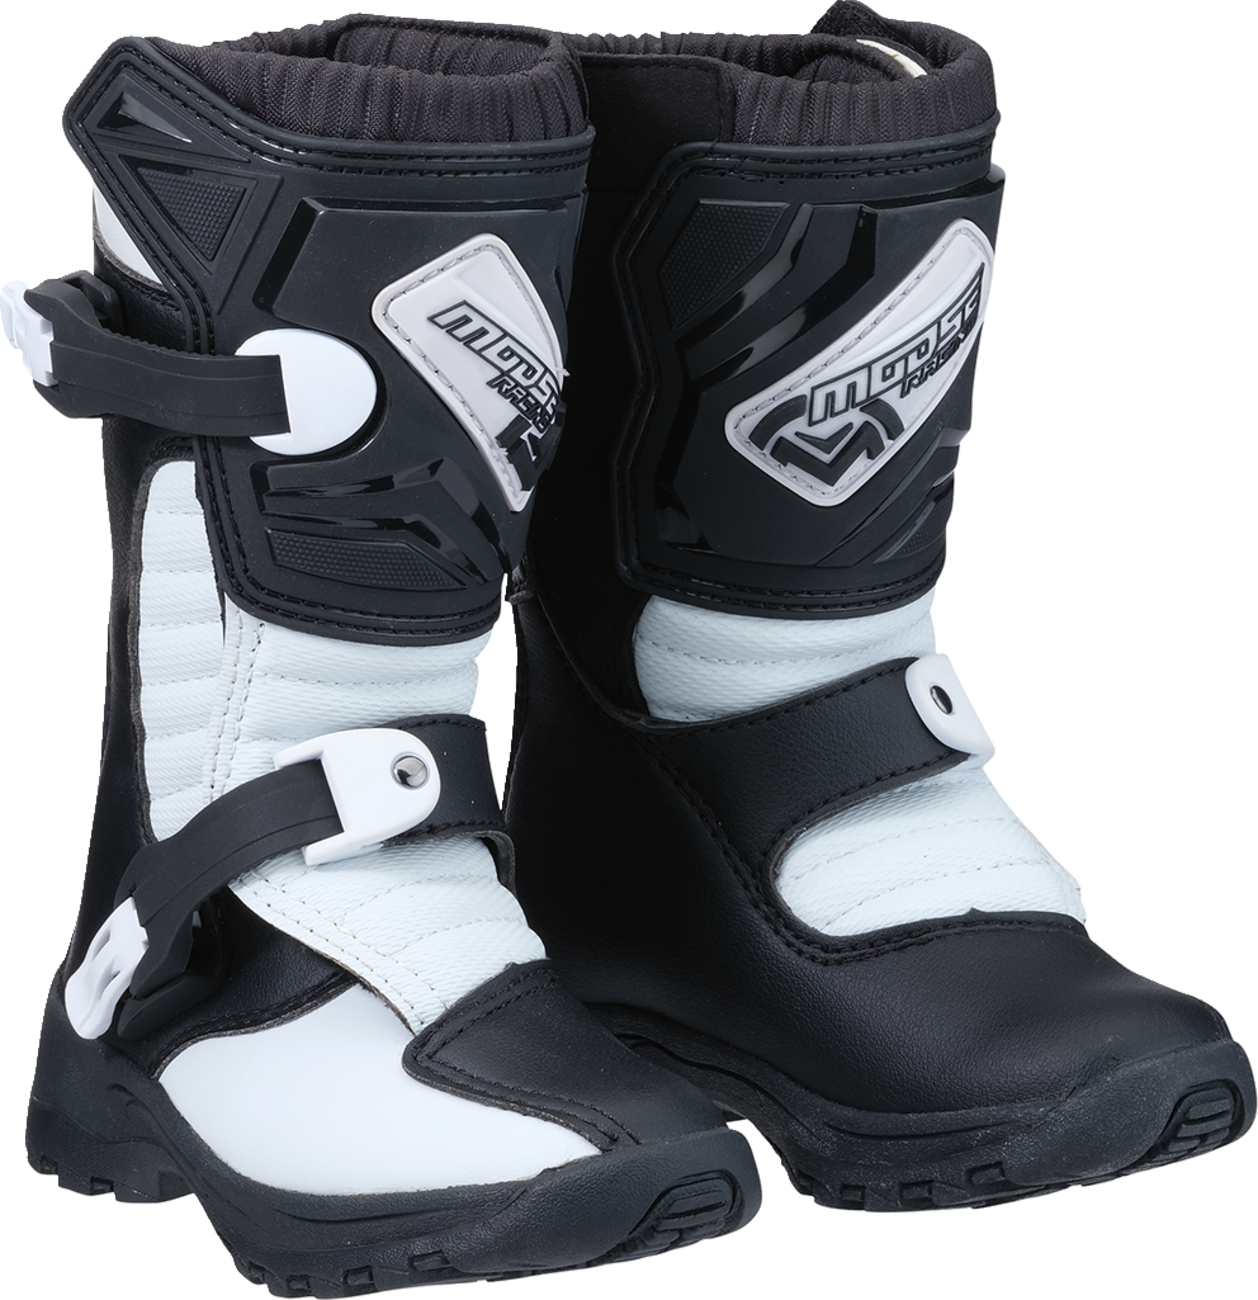 MOOSE RACING M1.3 Boots - Black/White - Size 5 3411-0434